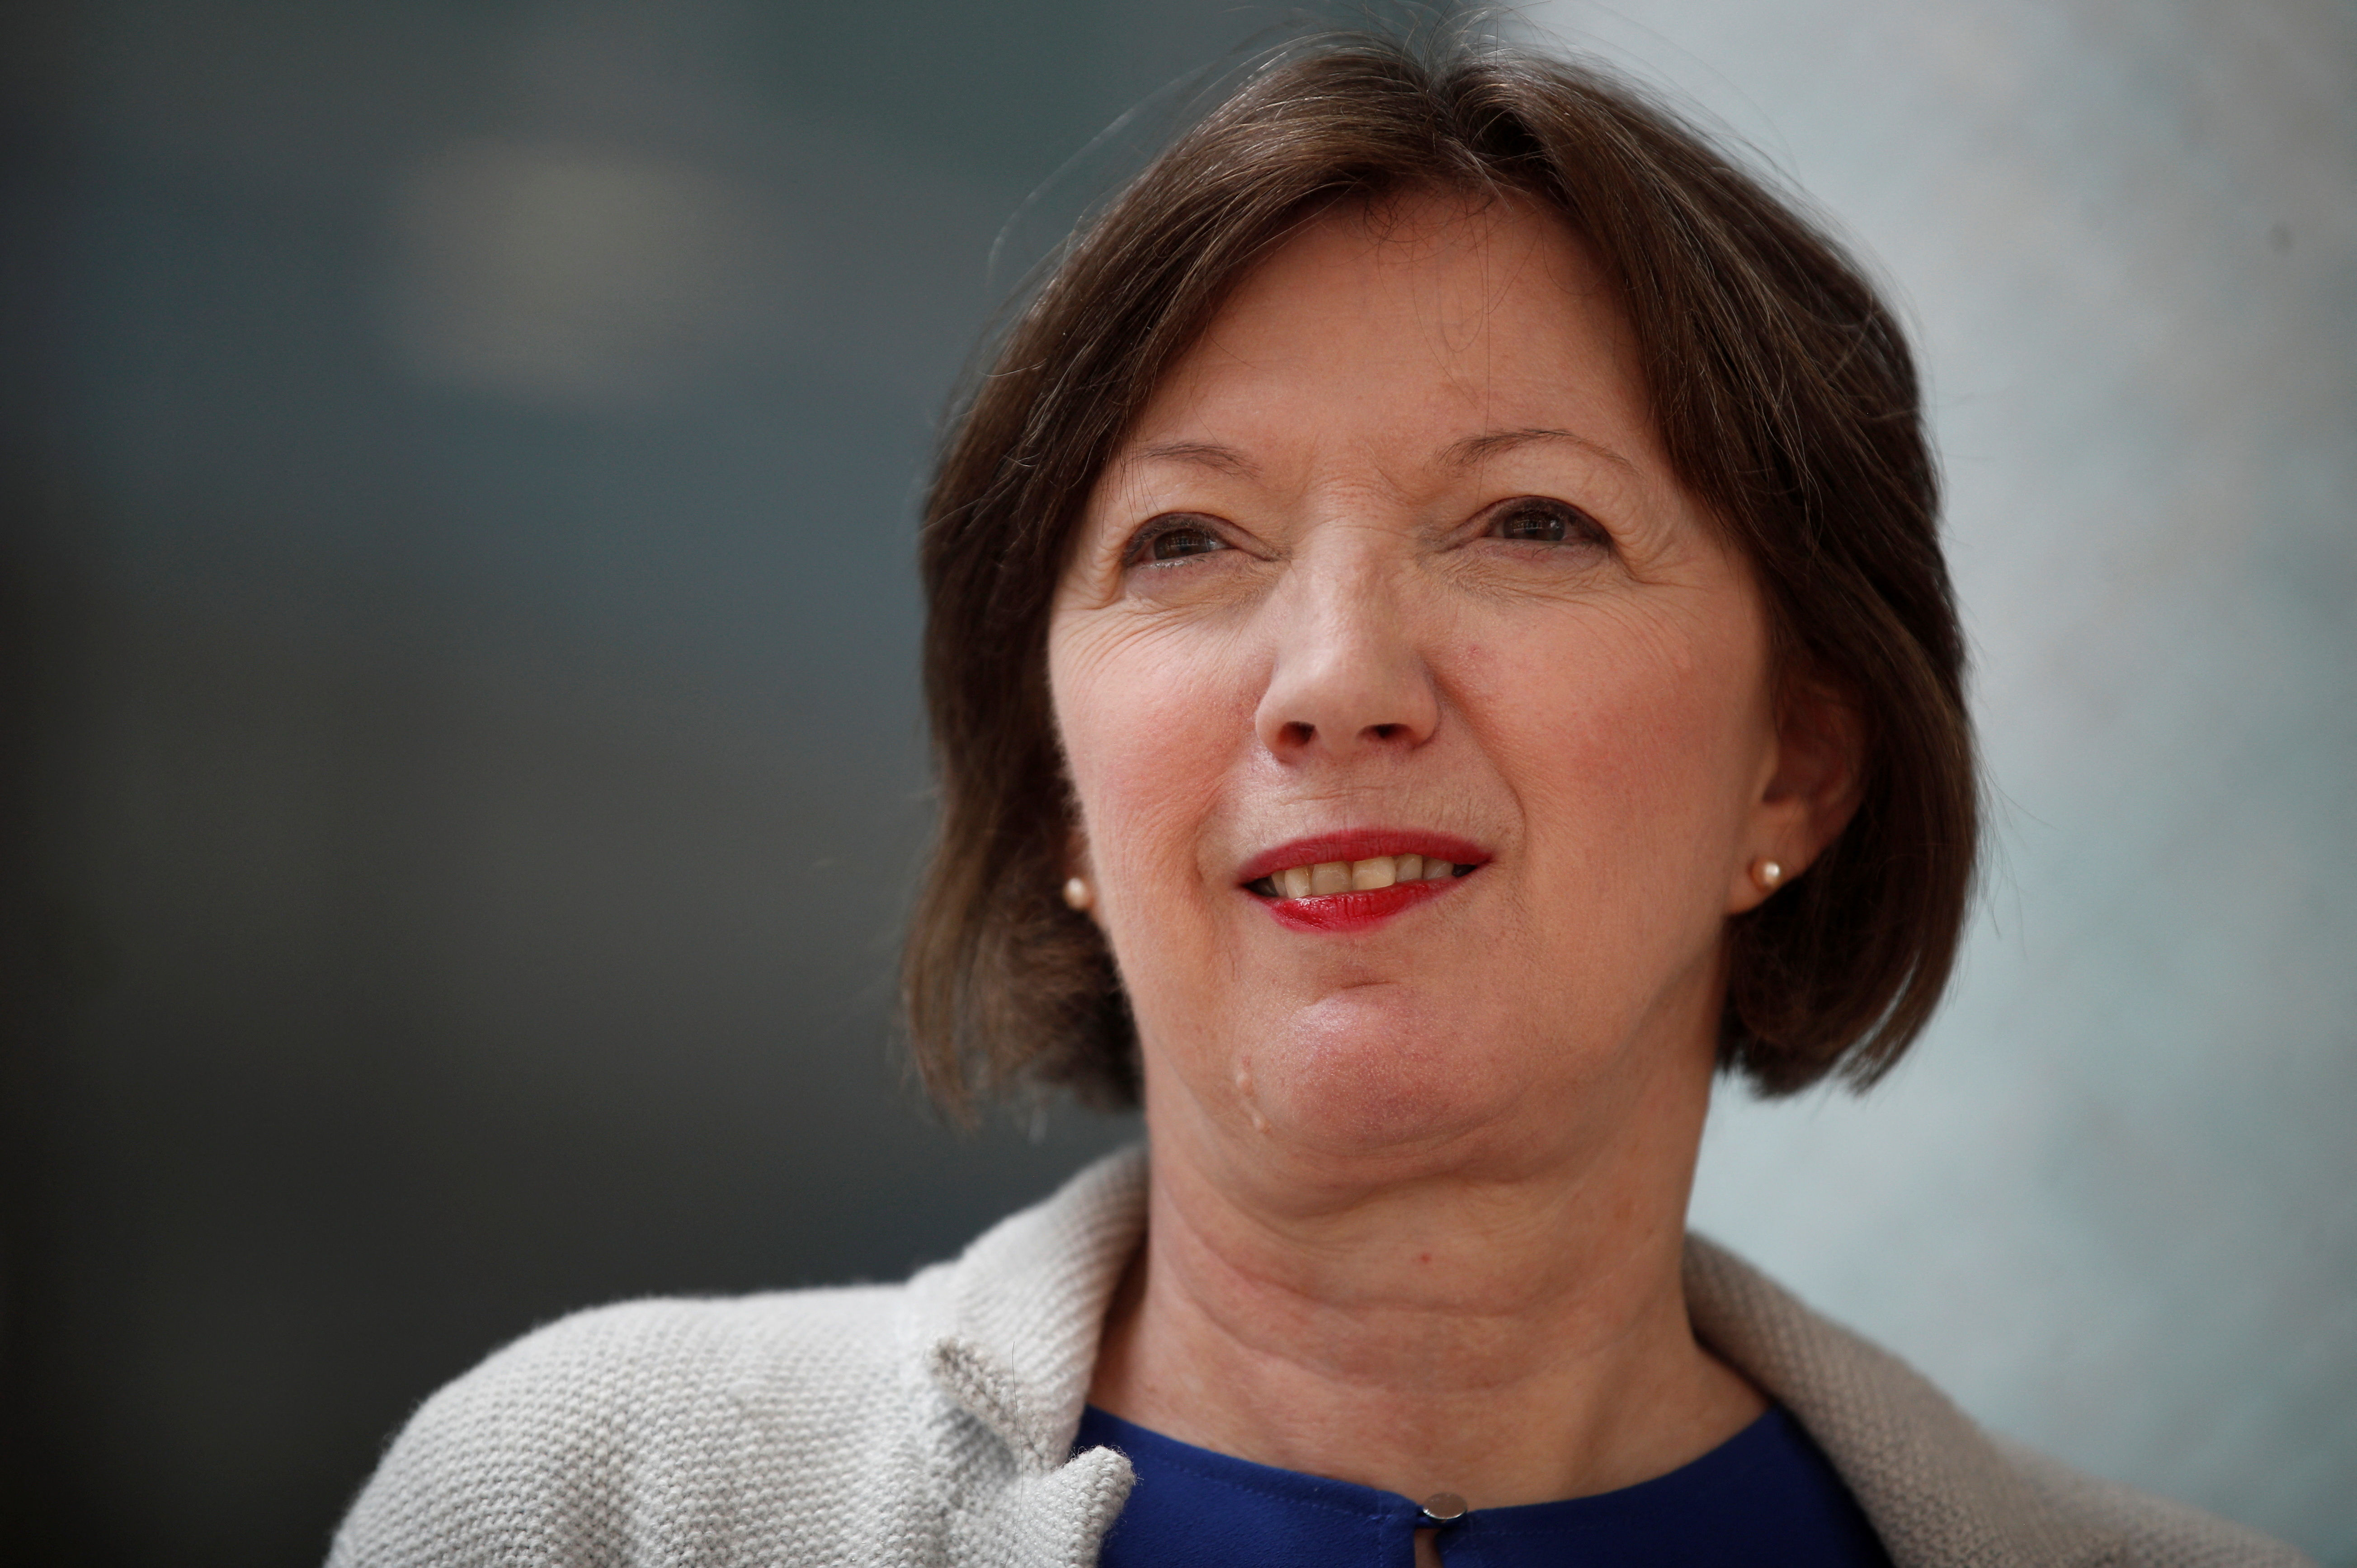 Frances O'Grady, General Secretary of the British Trades Union Congress poses for a photograph following an interview with Reuters journalists, in London